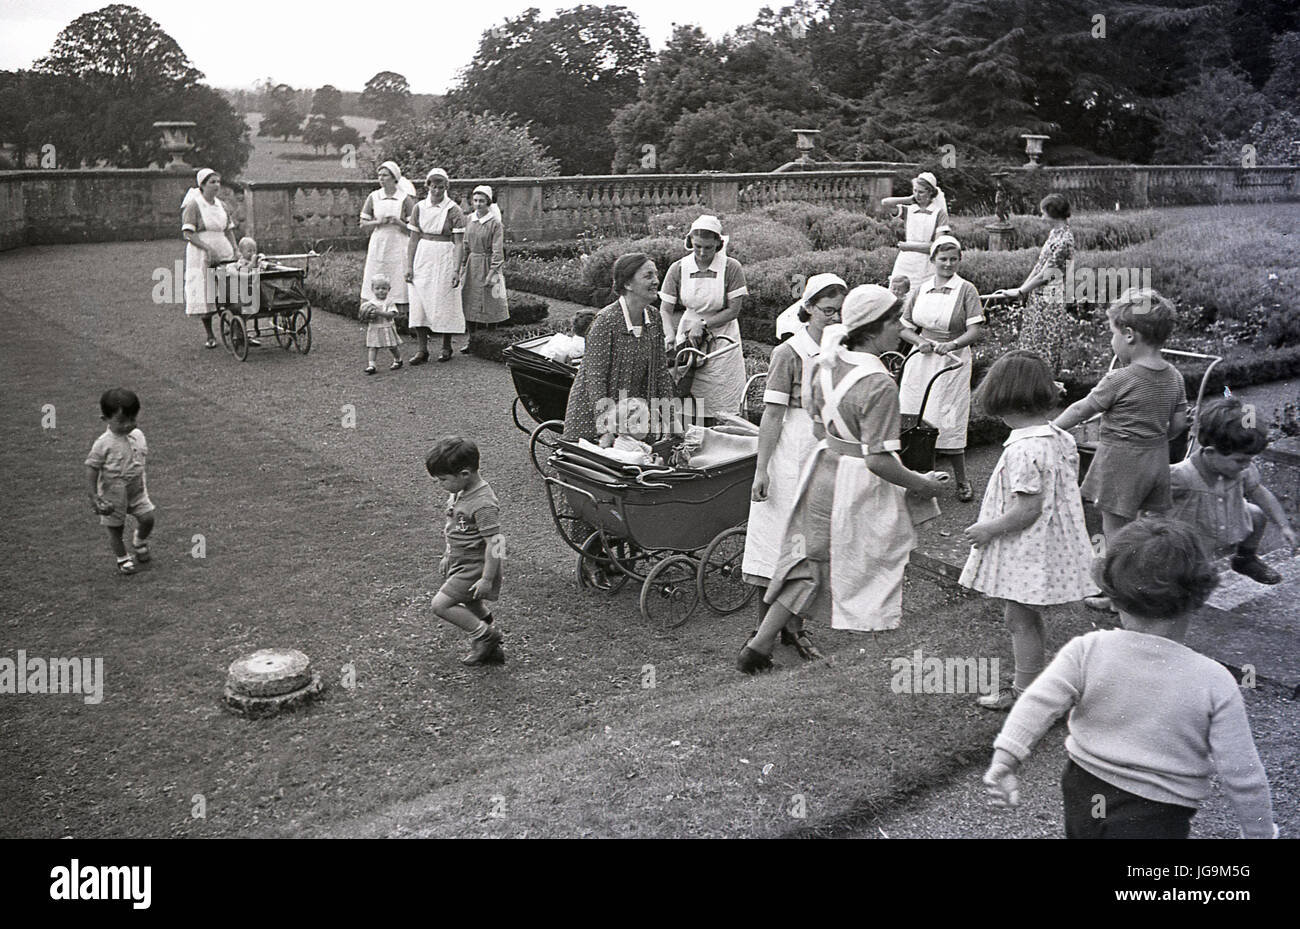 1940, England, wartime, nurses with childern In the grounds of Stanstead Hall, home of Lady Butler (Sydney Courtauld) wife of Rab Butler, Conservative politician, the nurses were there to look after the child evacuees from London who had left during the blitz. Stock Photo